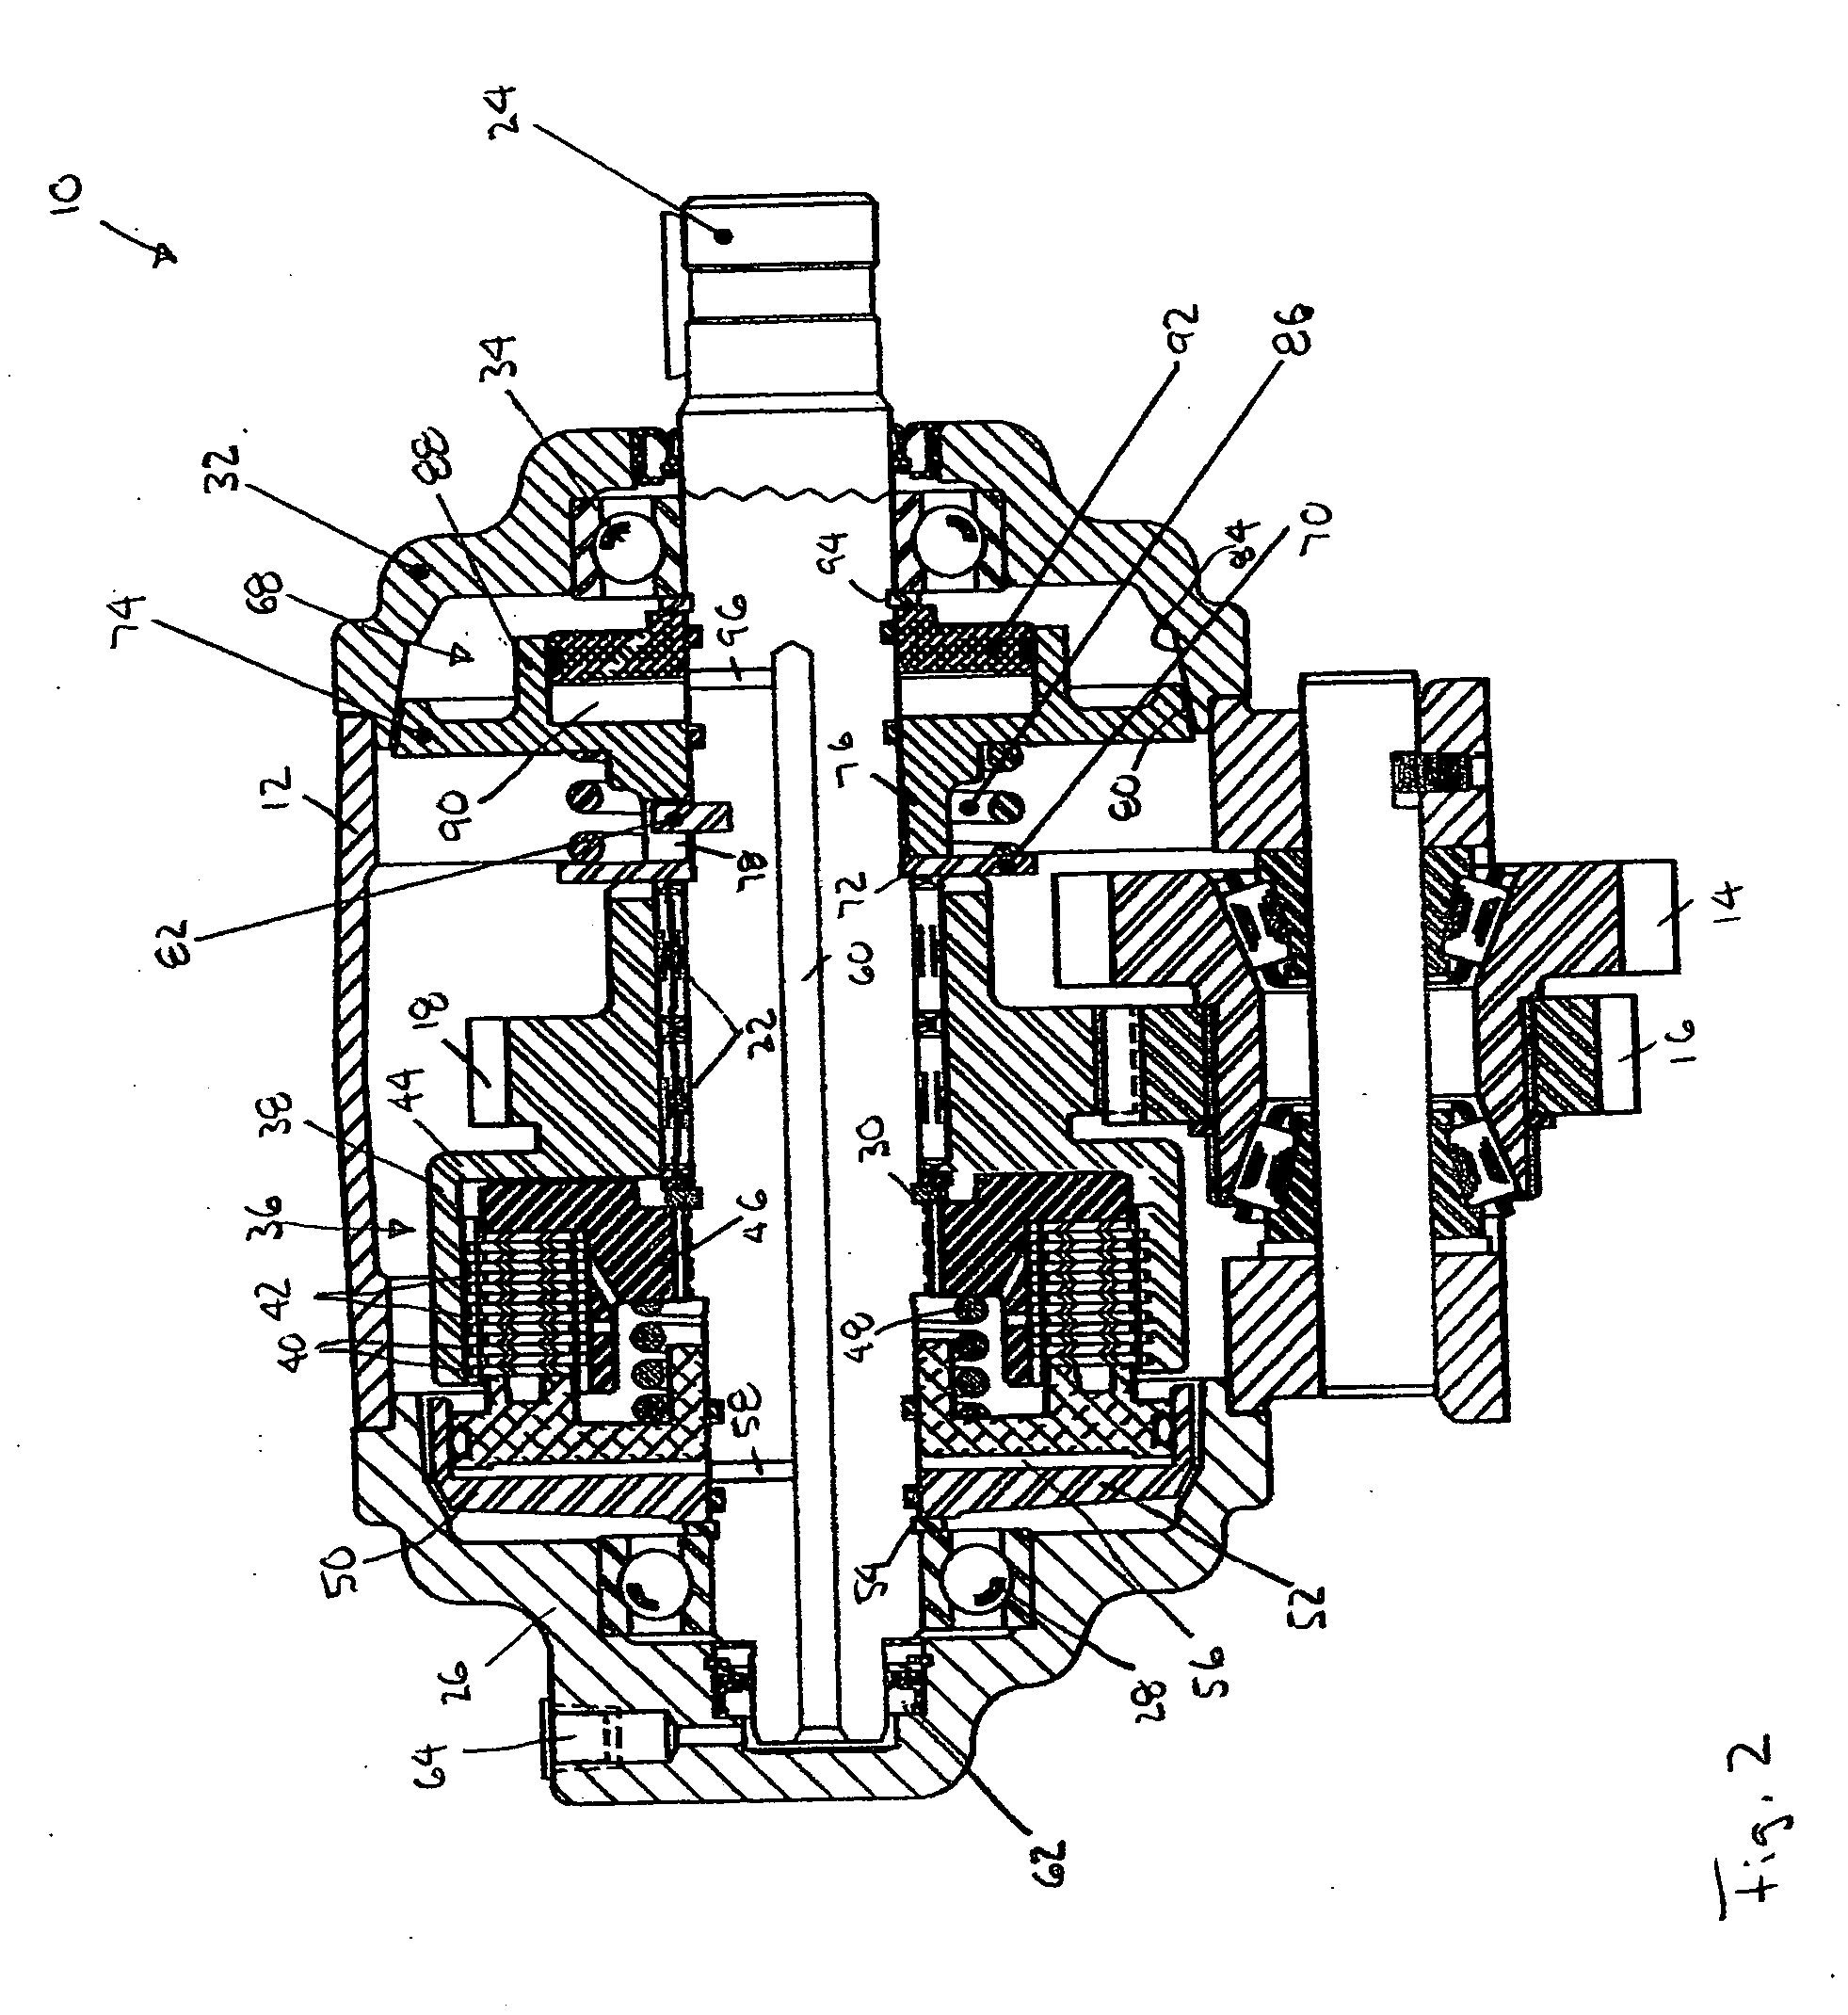 Automatic drag brake for a power take-off unit output shaft